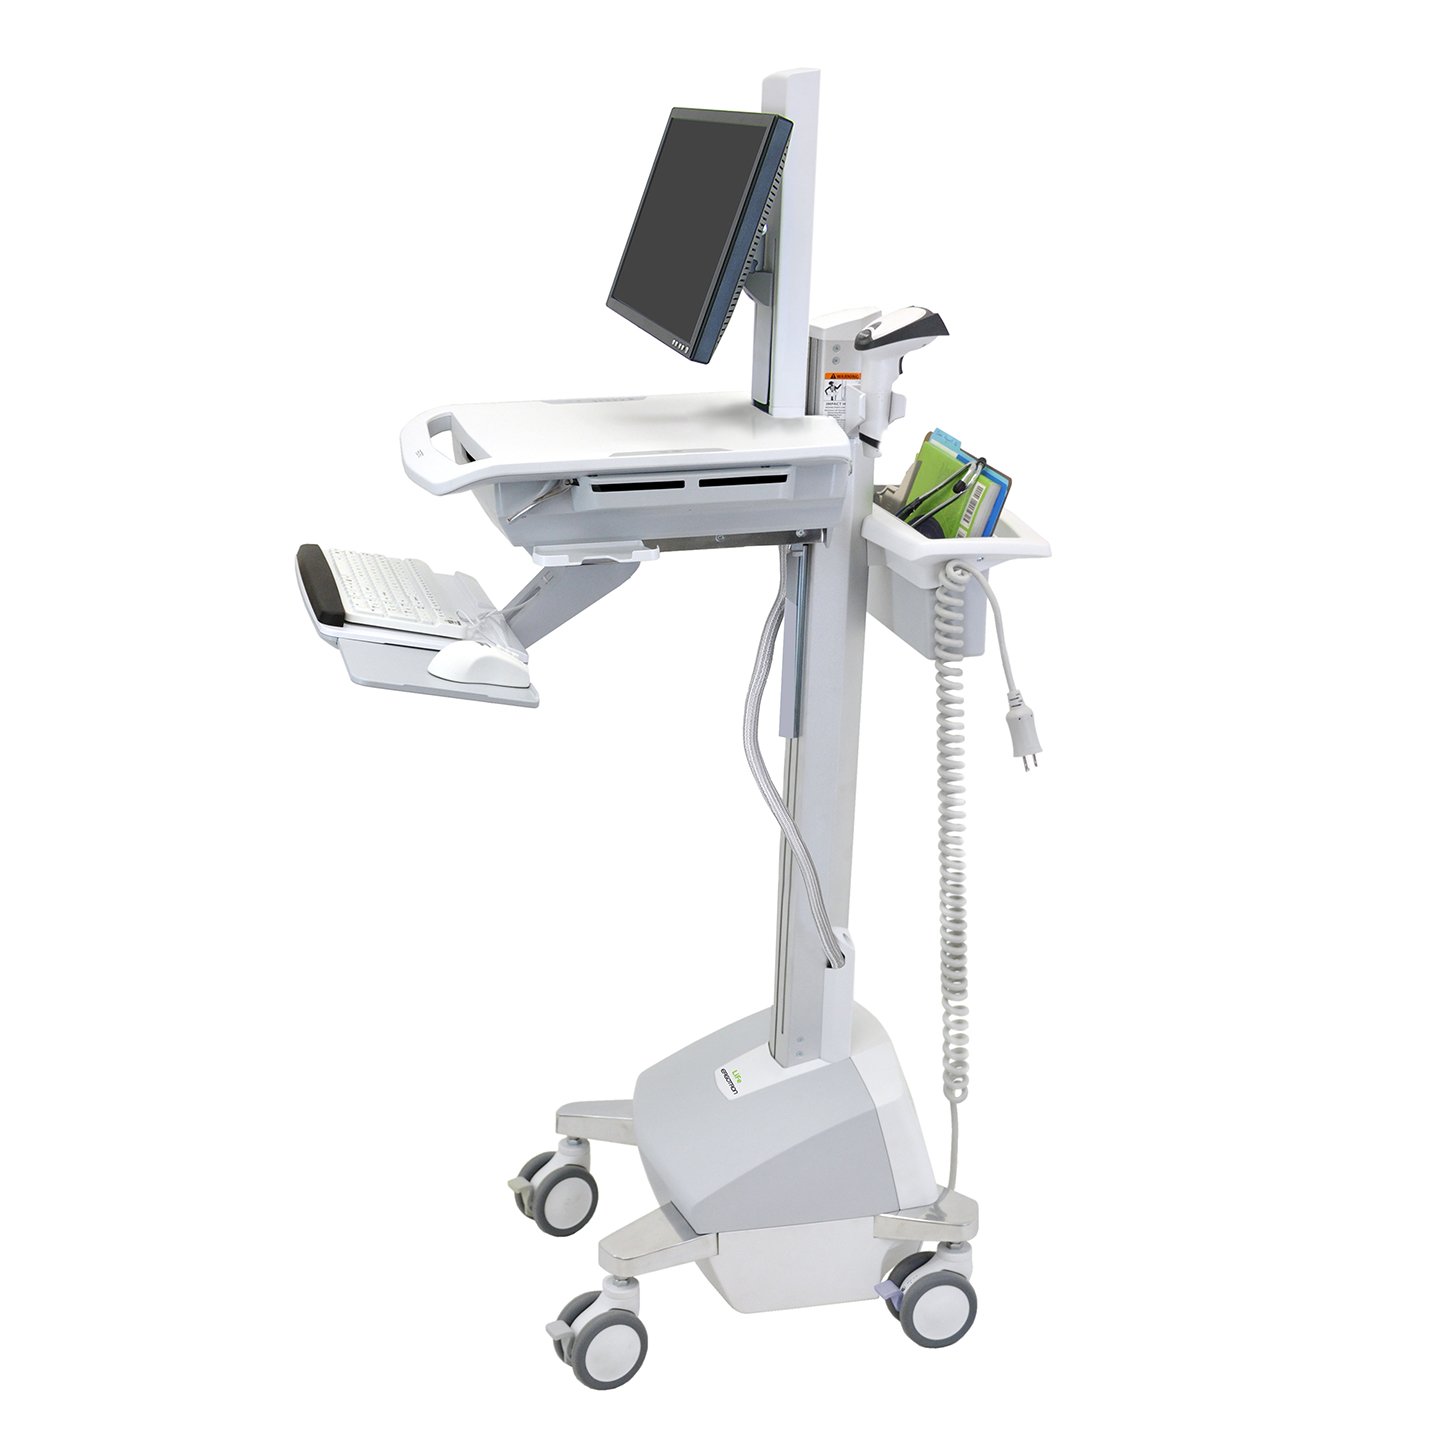 Haworth StyleView Powered Medical Cart Accessories in white and adjustable height with wheels with notebooks in it and monitor attached